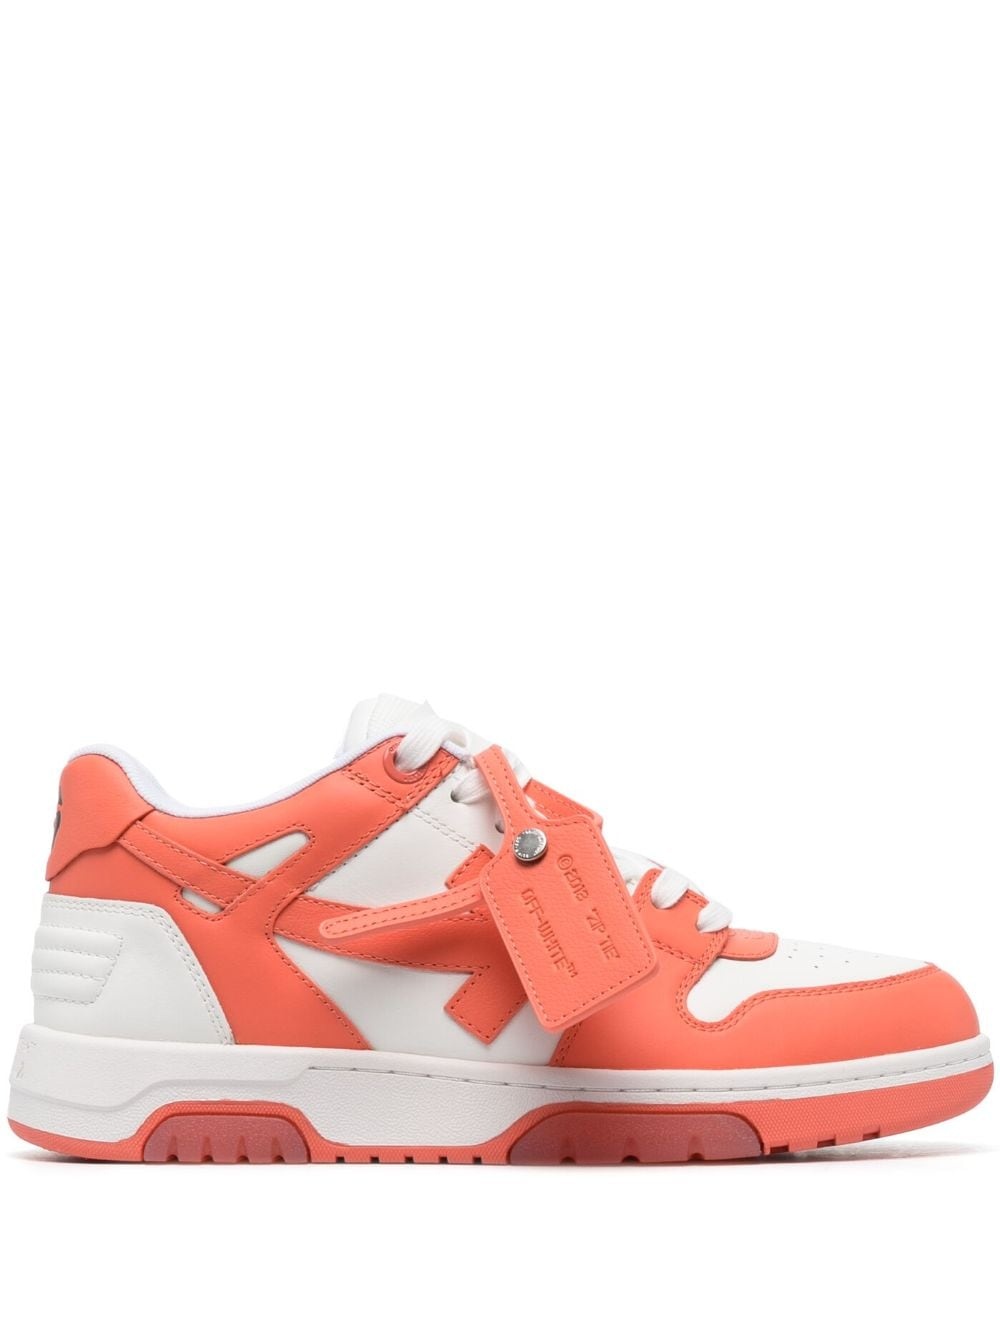 OOO Out of Office Orange / Blue Low Top Sneakers